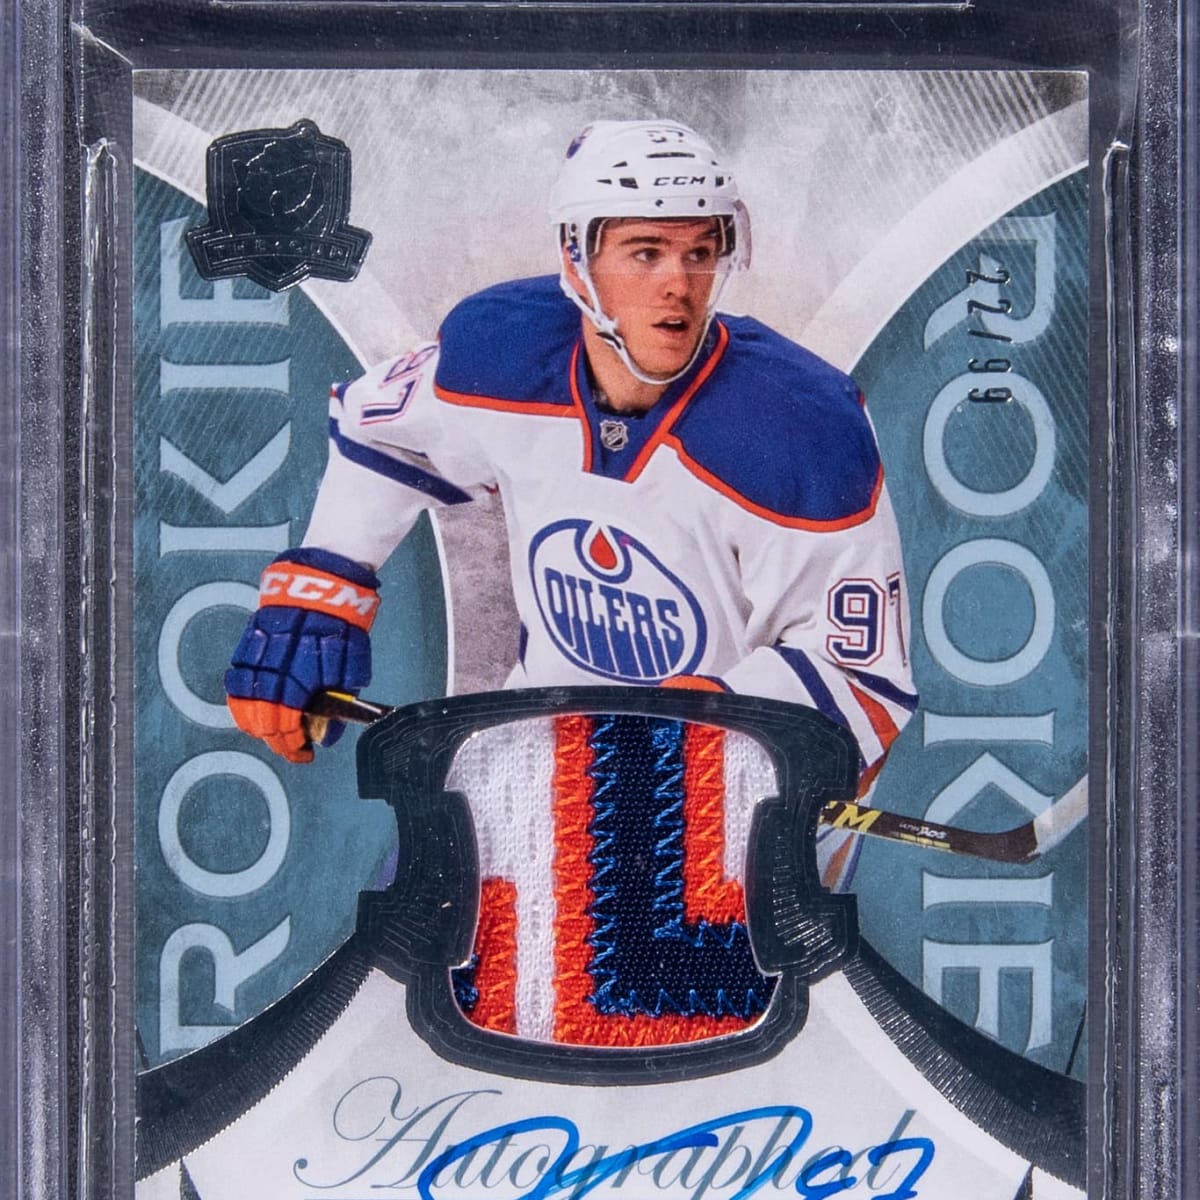 Top rookie cards of NHL superstar Connor McDavid - Sports Collectors Digest